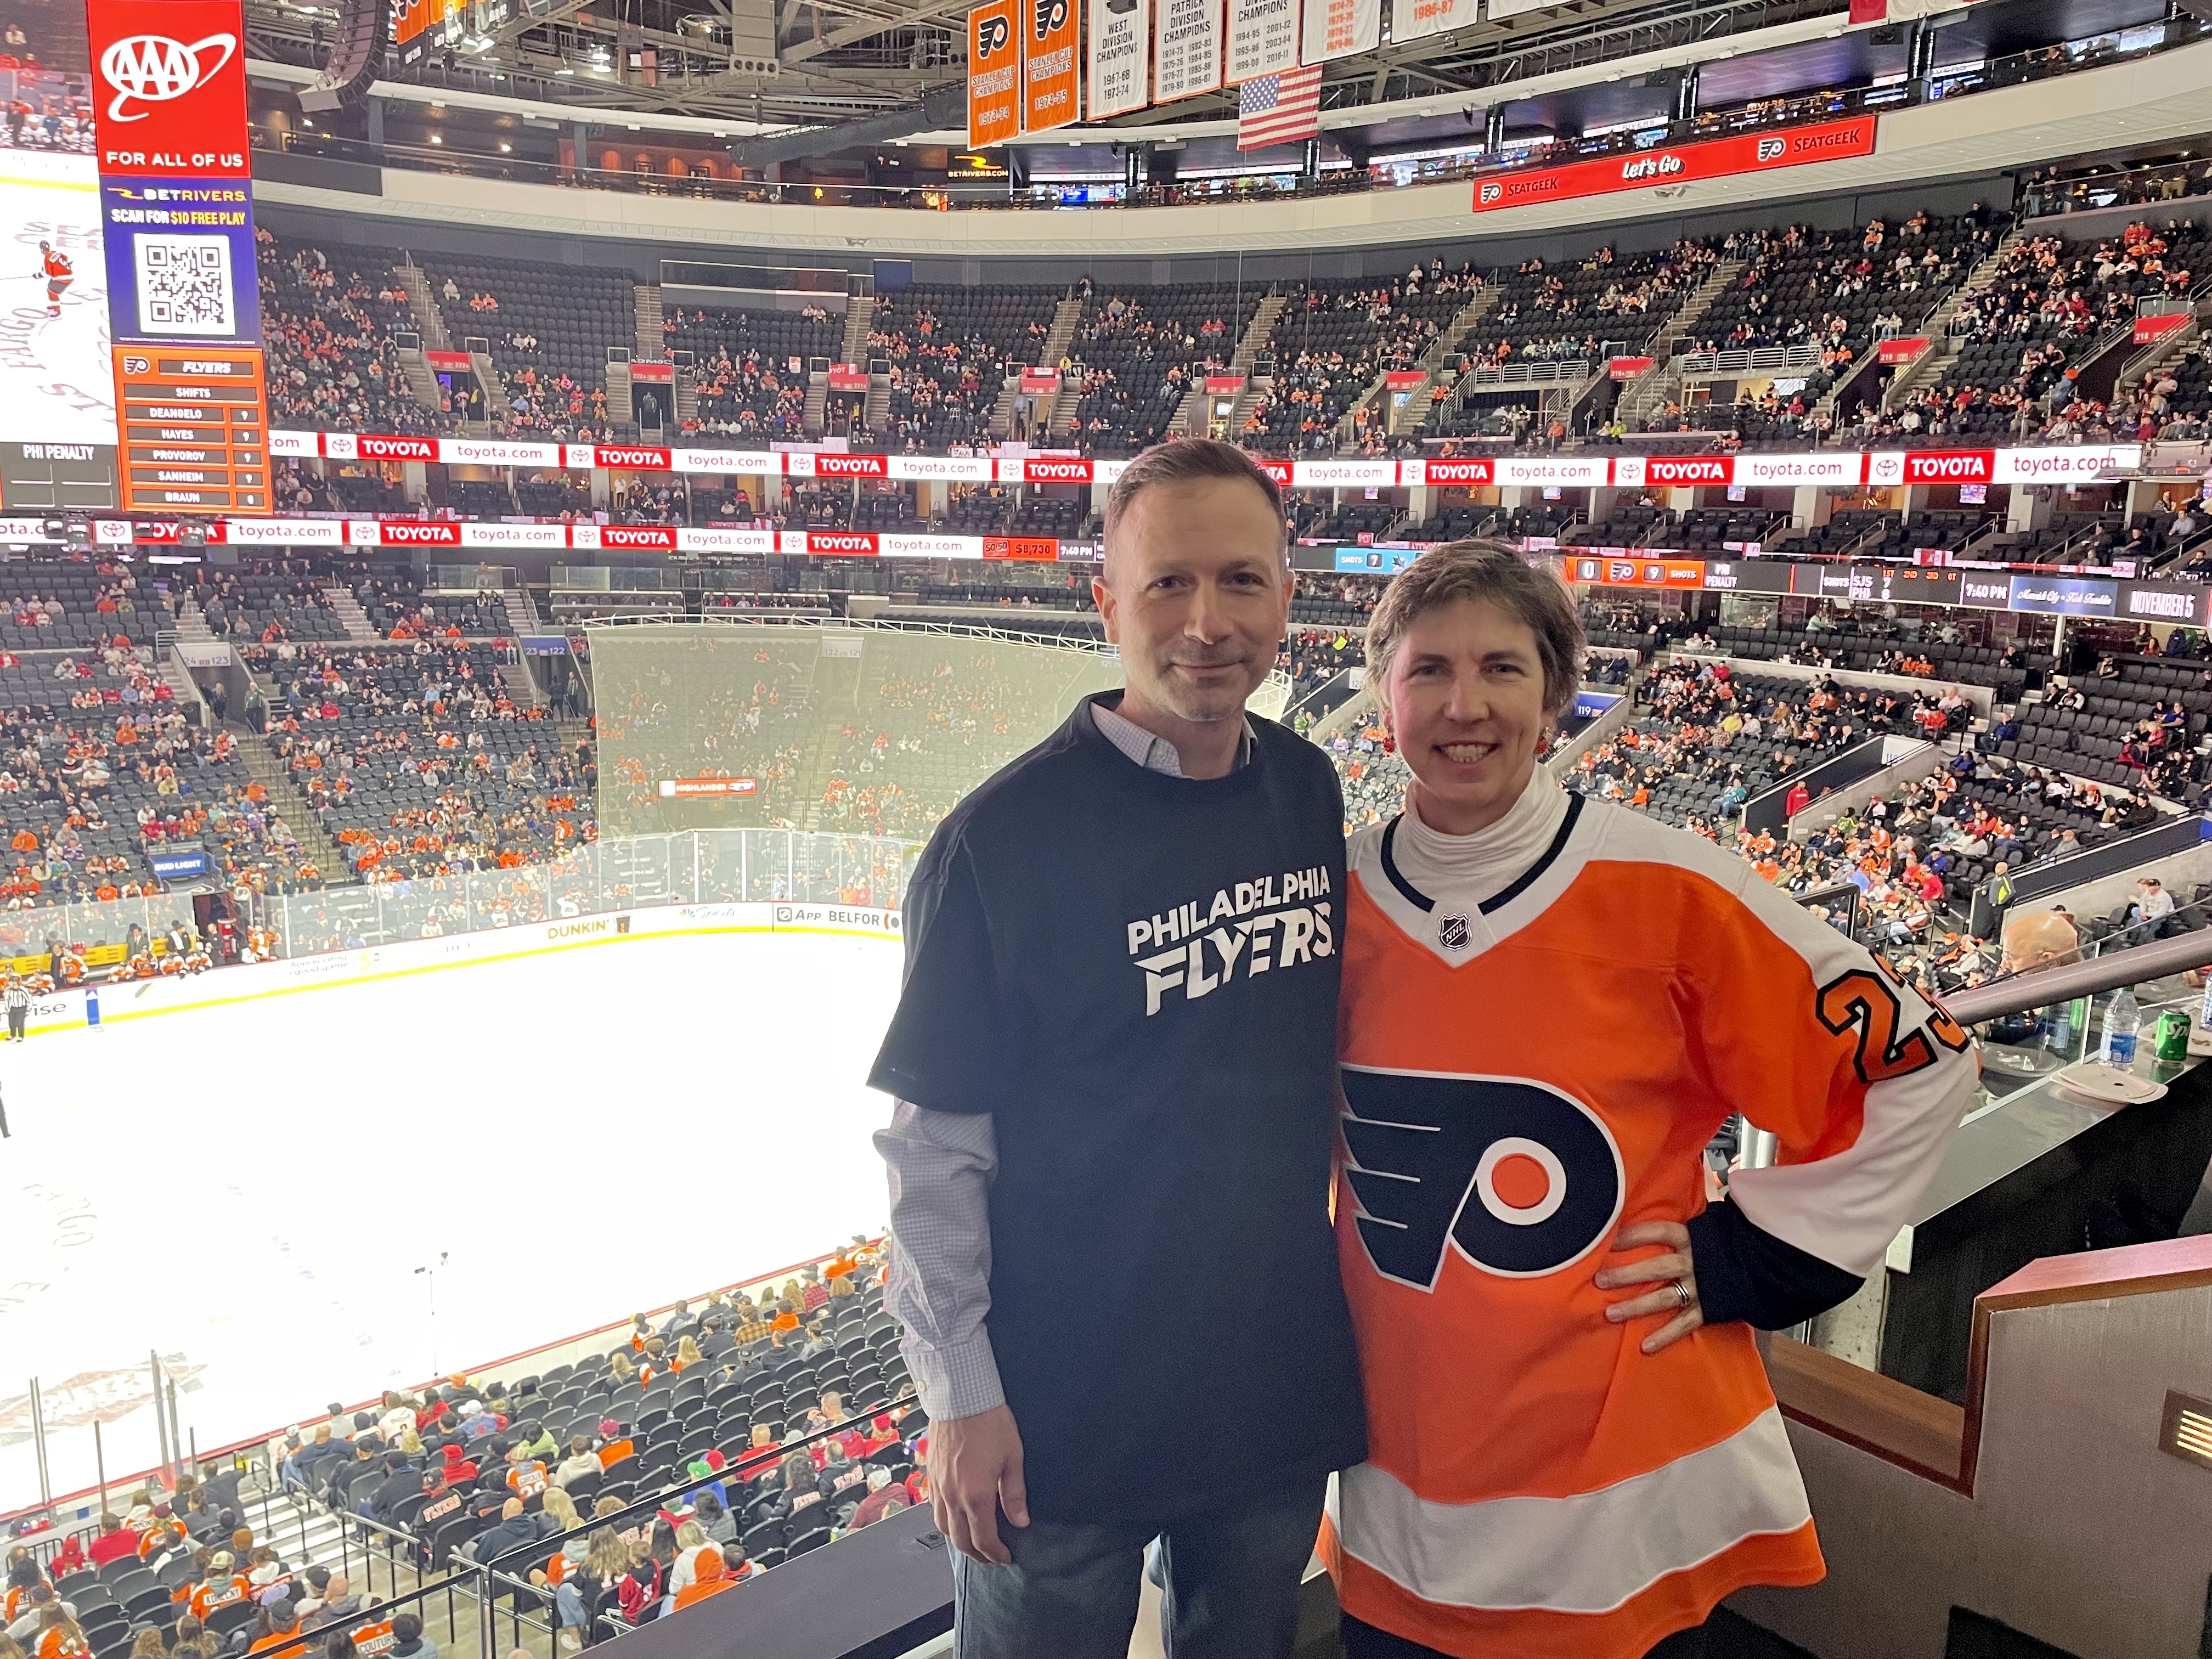 Lindblom emotional as Flyers support people fighting cancer